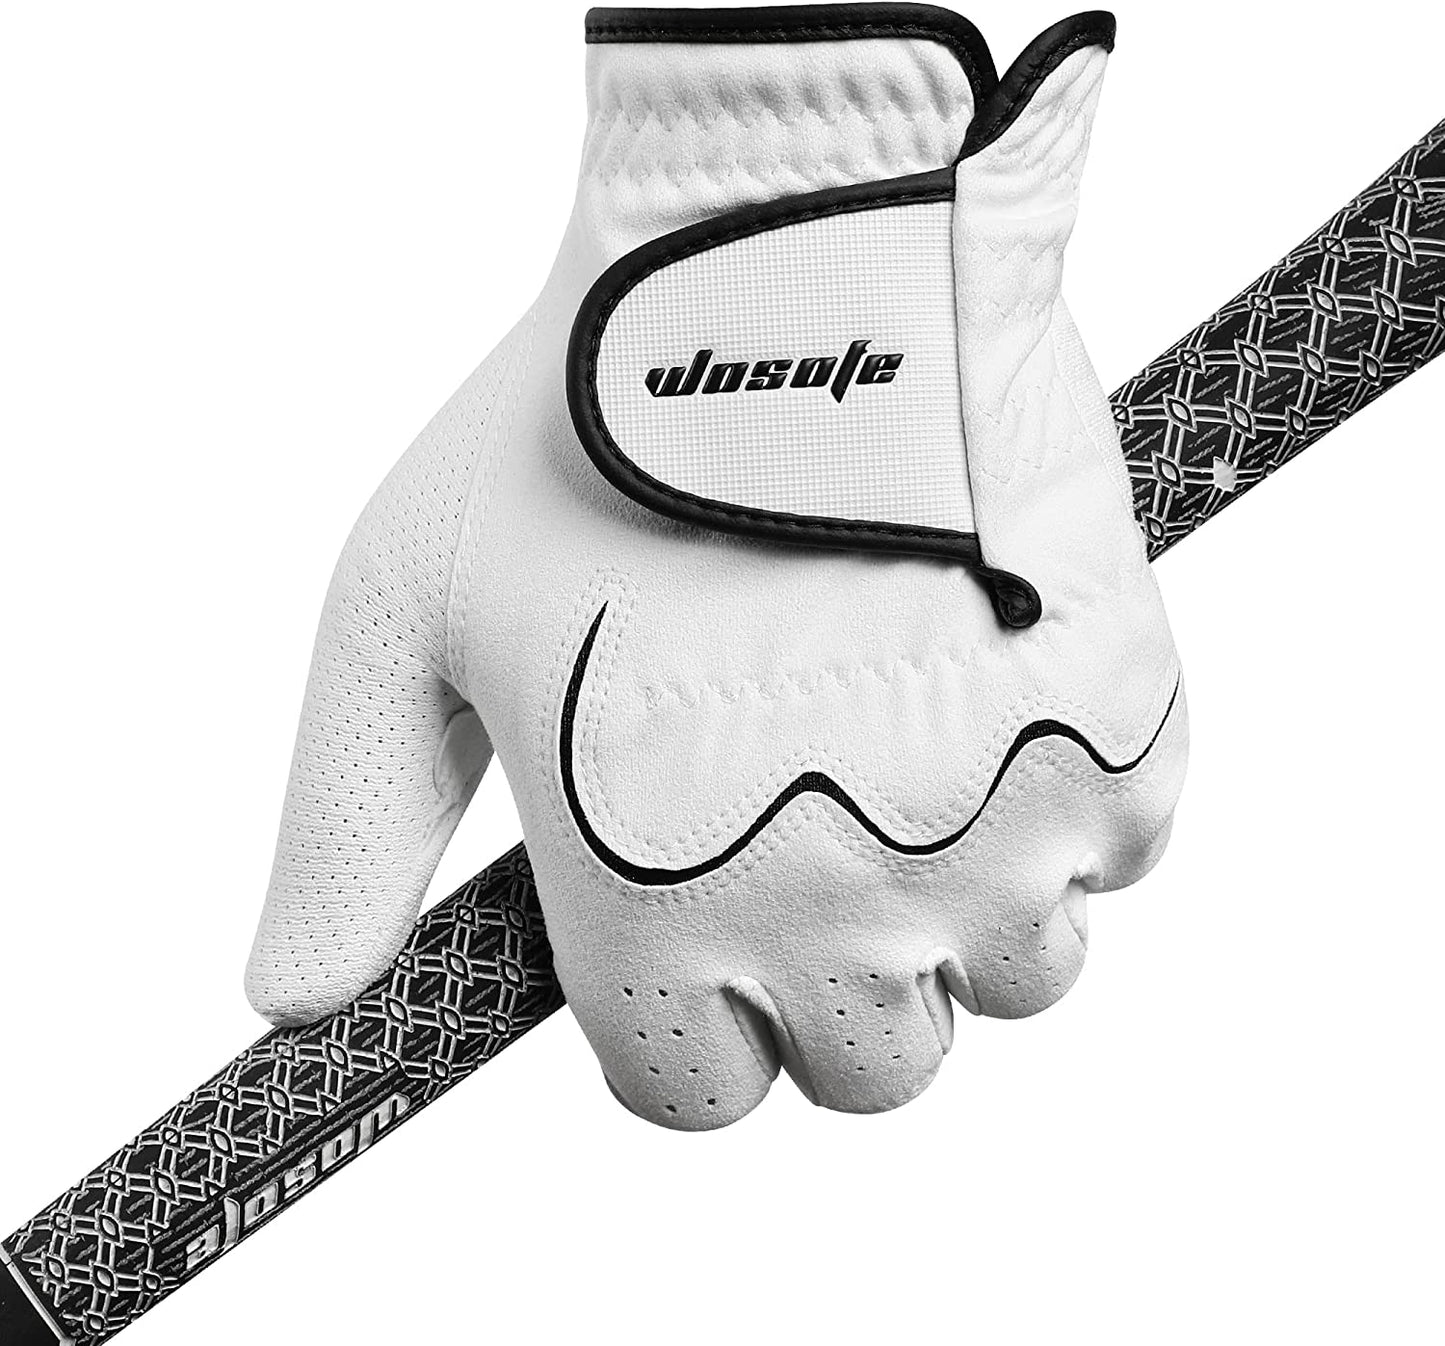 wosofe Men’s Golf Glove Left Hand Non-Slip Breathable Lycra Nanocloth Soft Comfortable No Sweat All Weather Liner and Green Fork